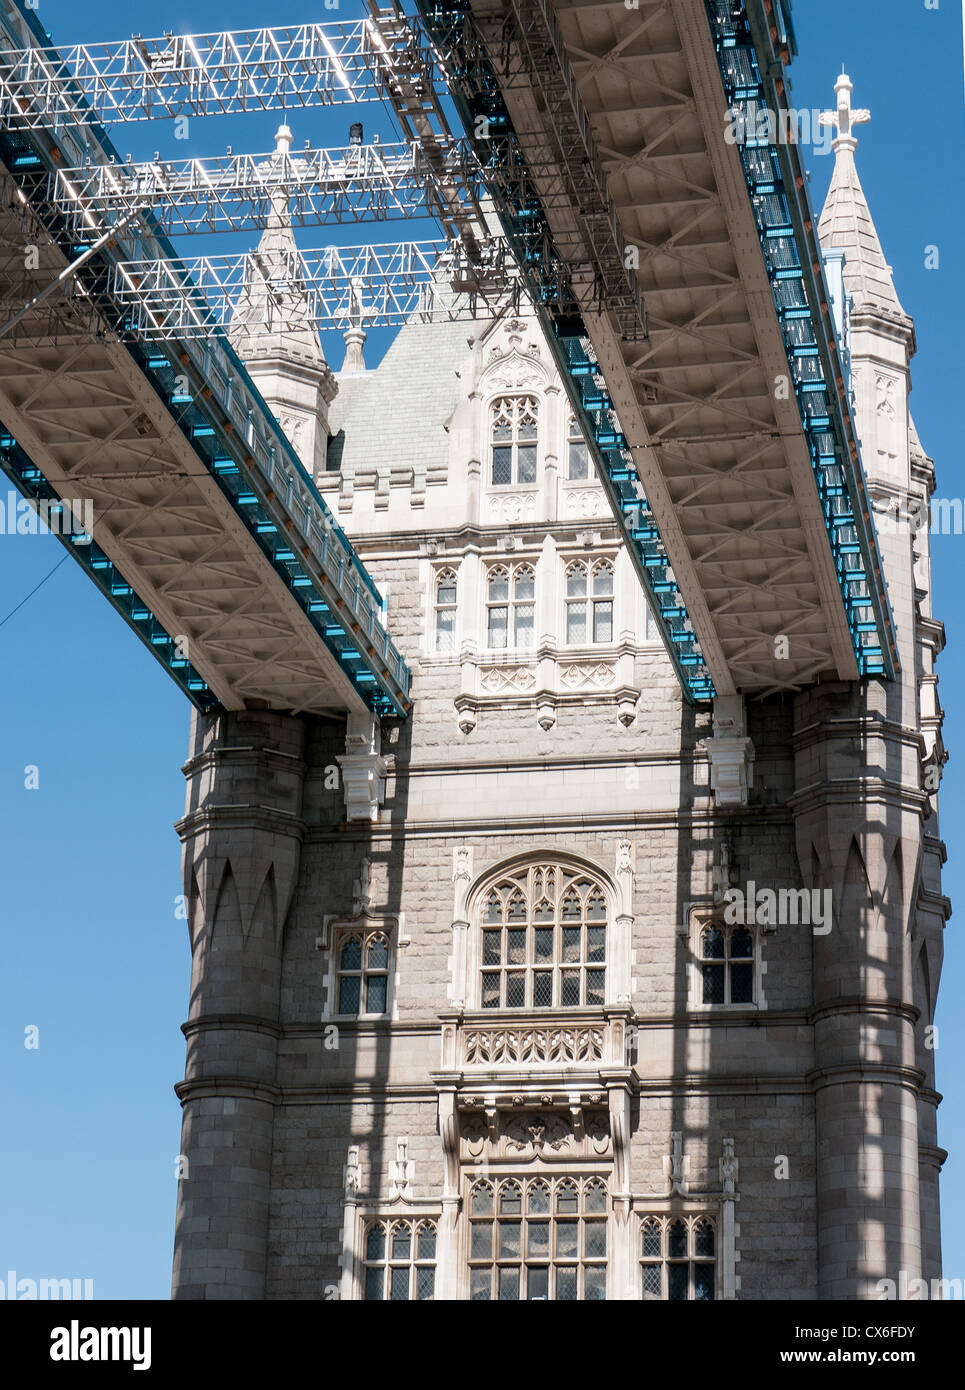 View of the North Tower of Tower Bridge, London, UK Stock Photo